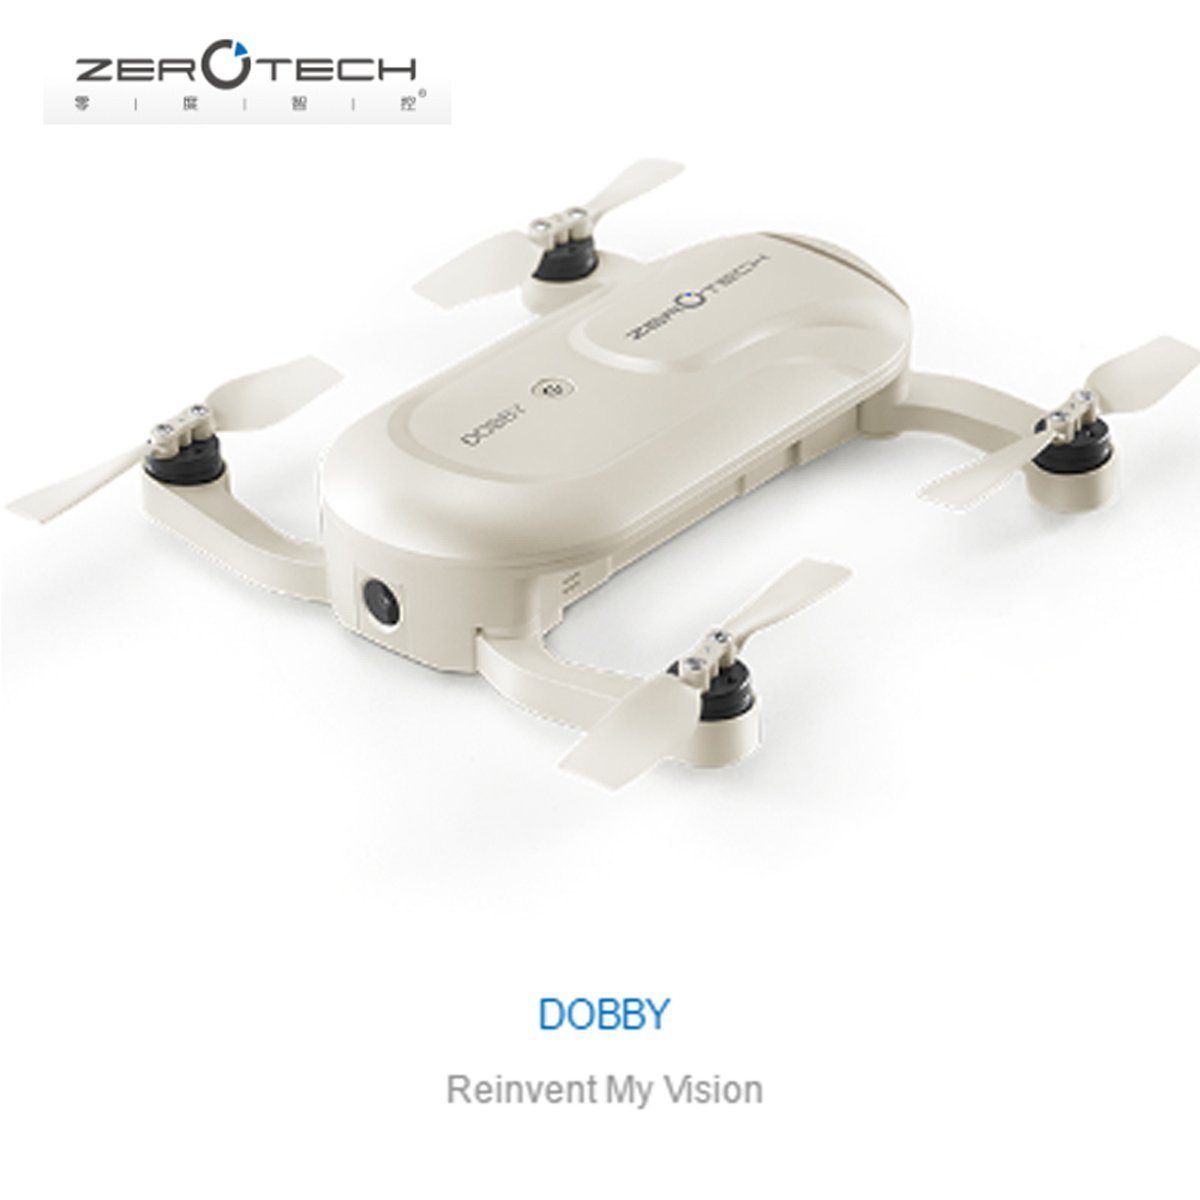 ZEROTECH Dobby Pocket Selfie Drone FPV With HD Camera Mini RC Quadcopter